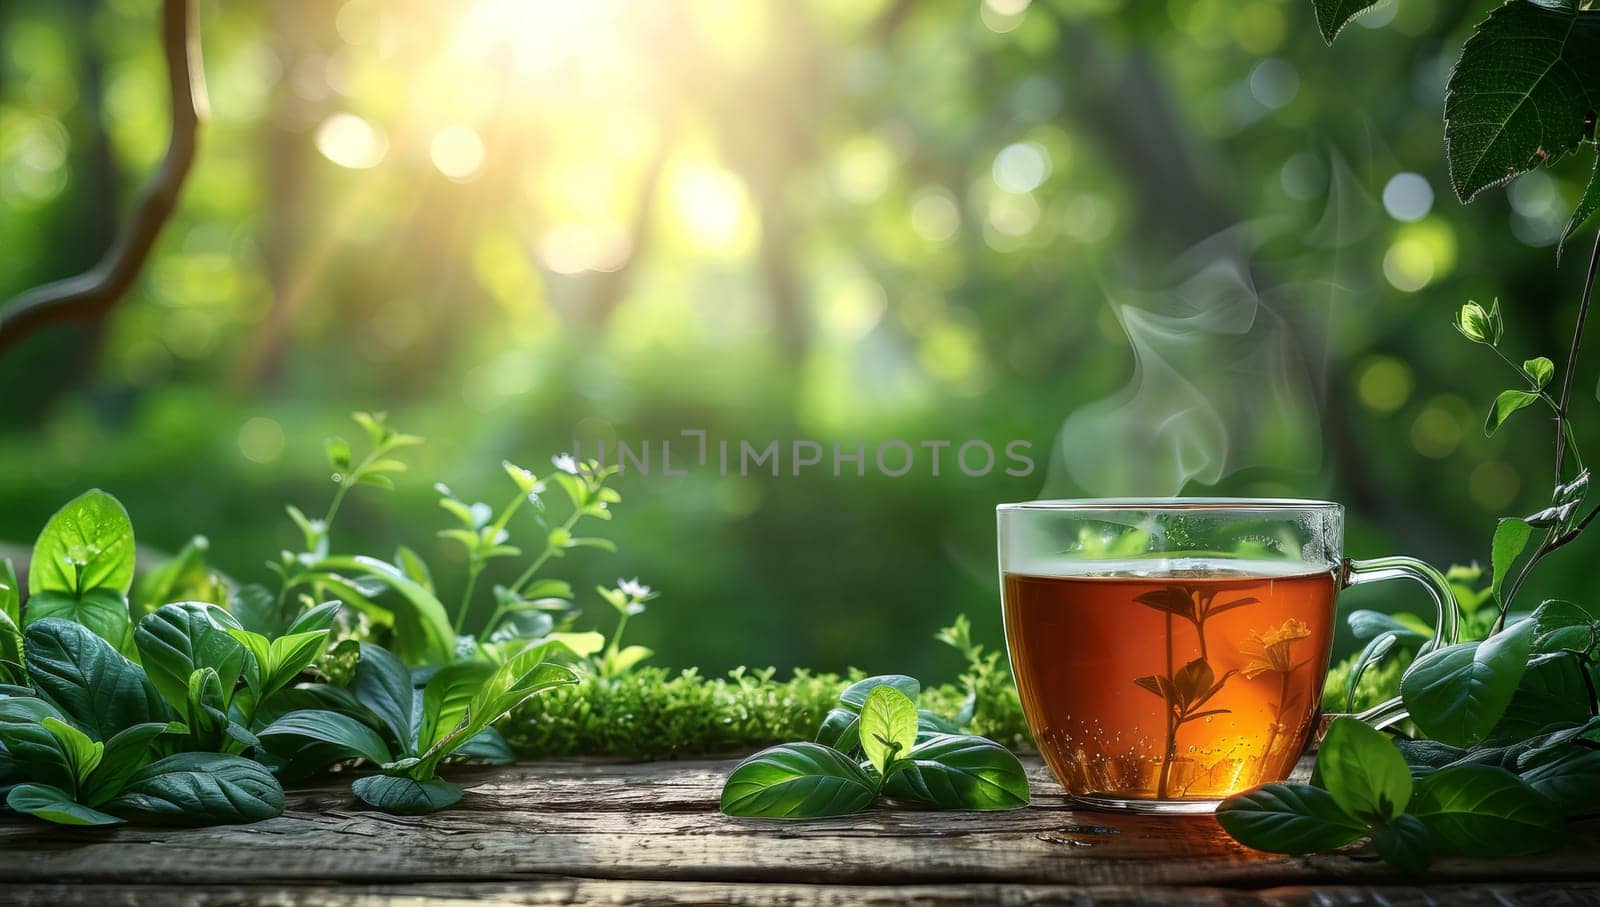 cup of green tea amidst lush greenery under the morning sun by ailike